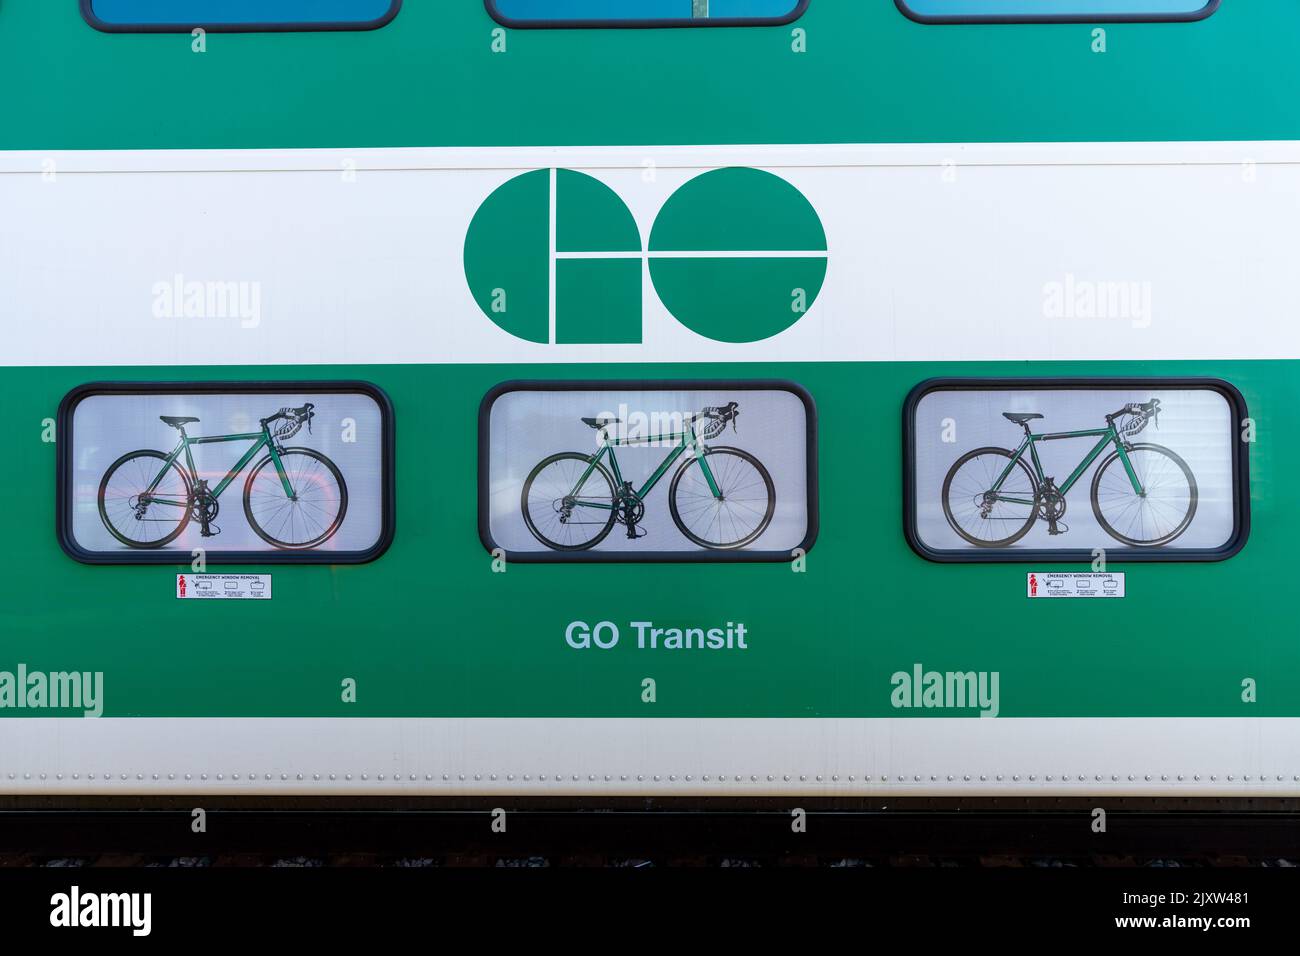 GO Transit Go Train carriage bicycle car. Stock Photo